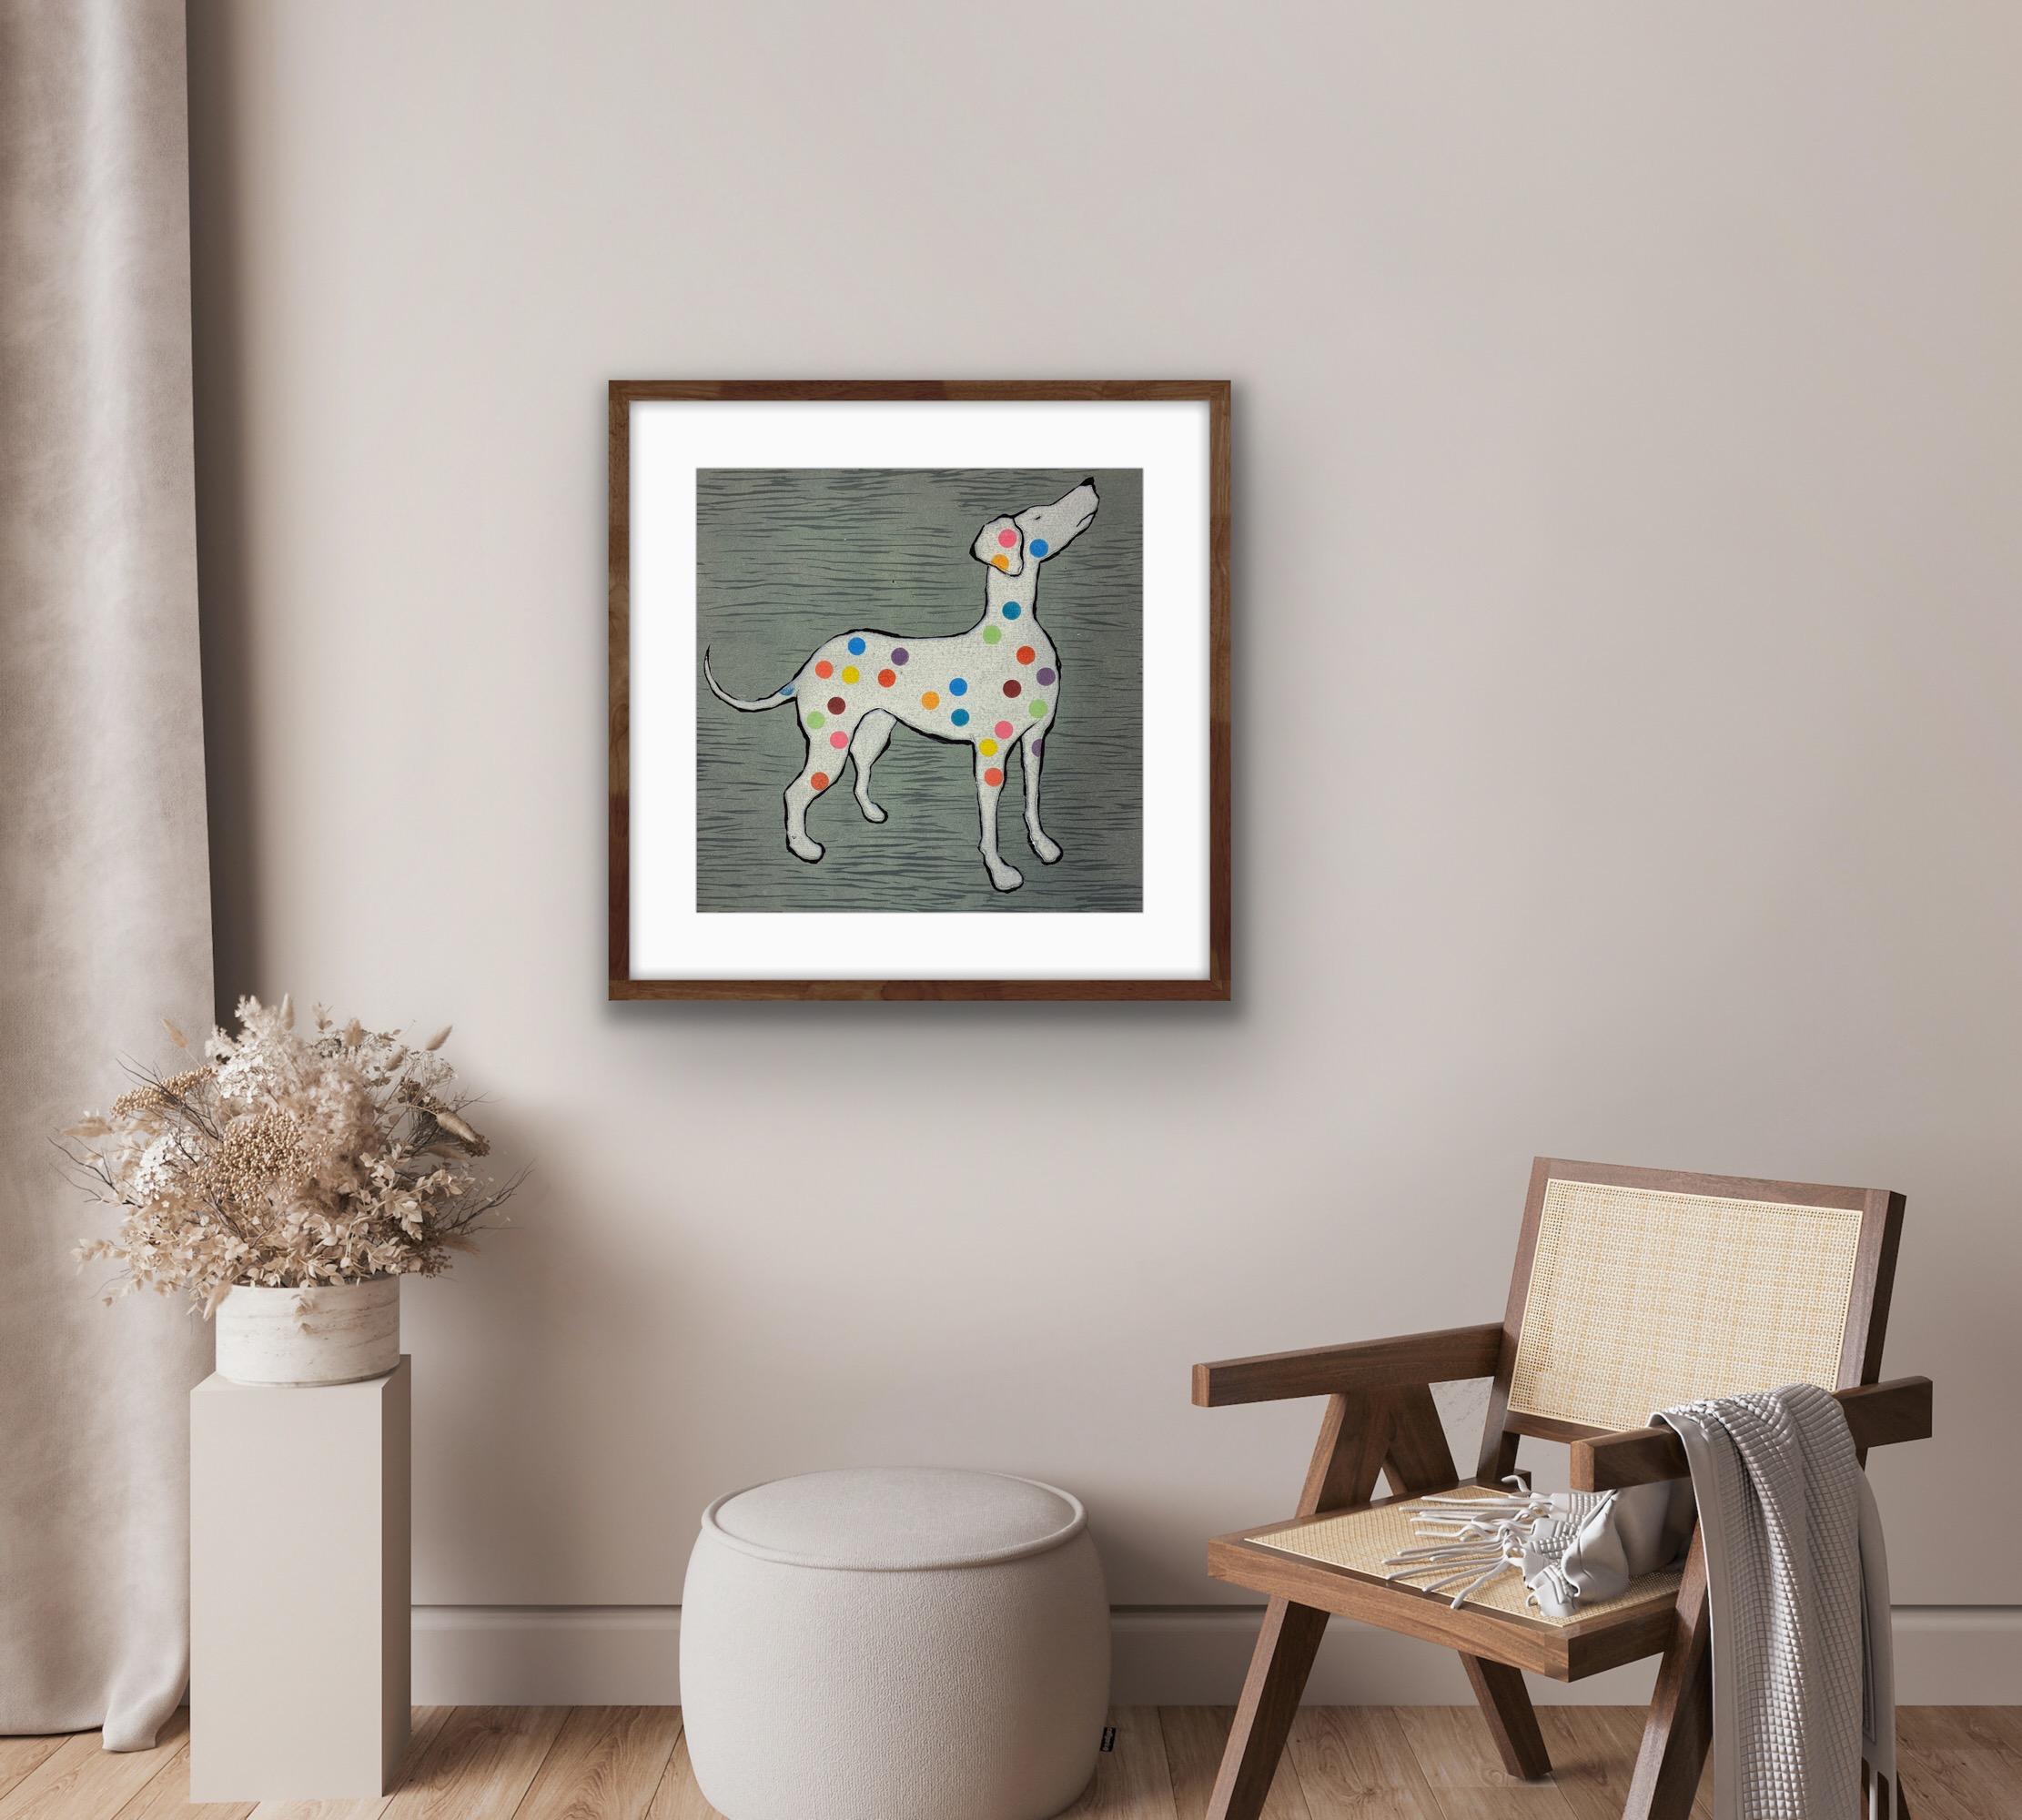 Damien Hirst's Dog, Pictures of Famous Artist's Pets, Damien Hirst Spots Style For Sale 5